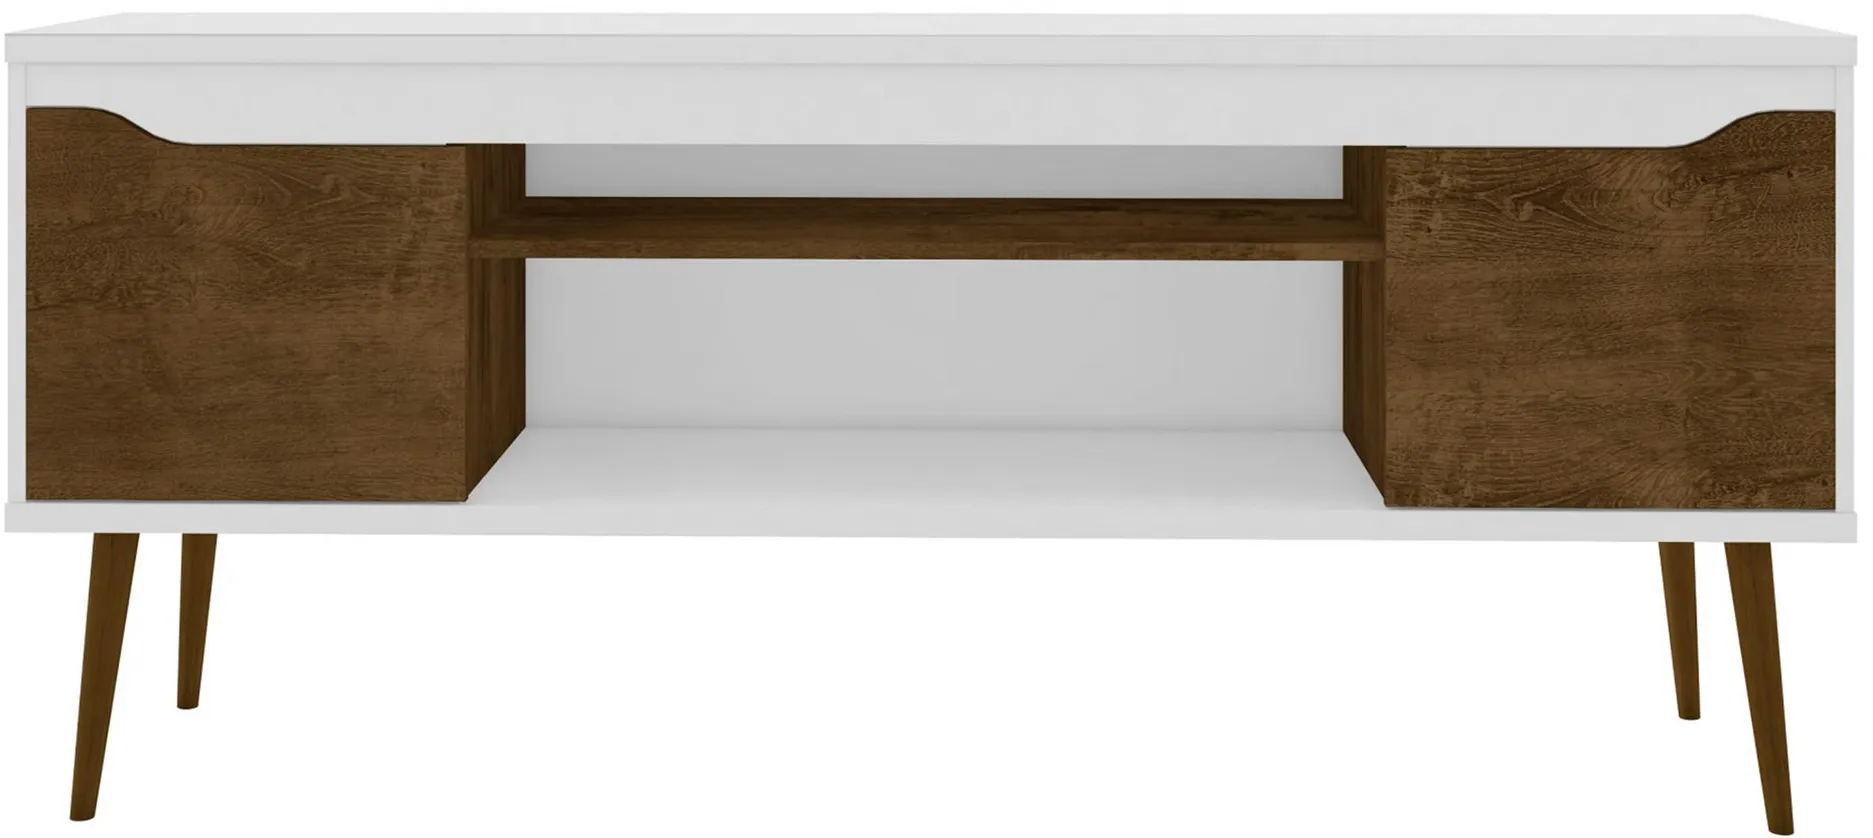 Bradley 62" TV Stand in White and Rustic Brown by Manhattan Comfort